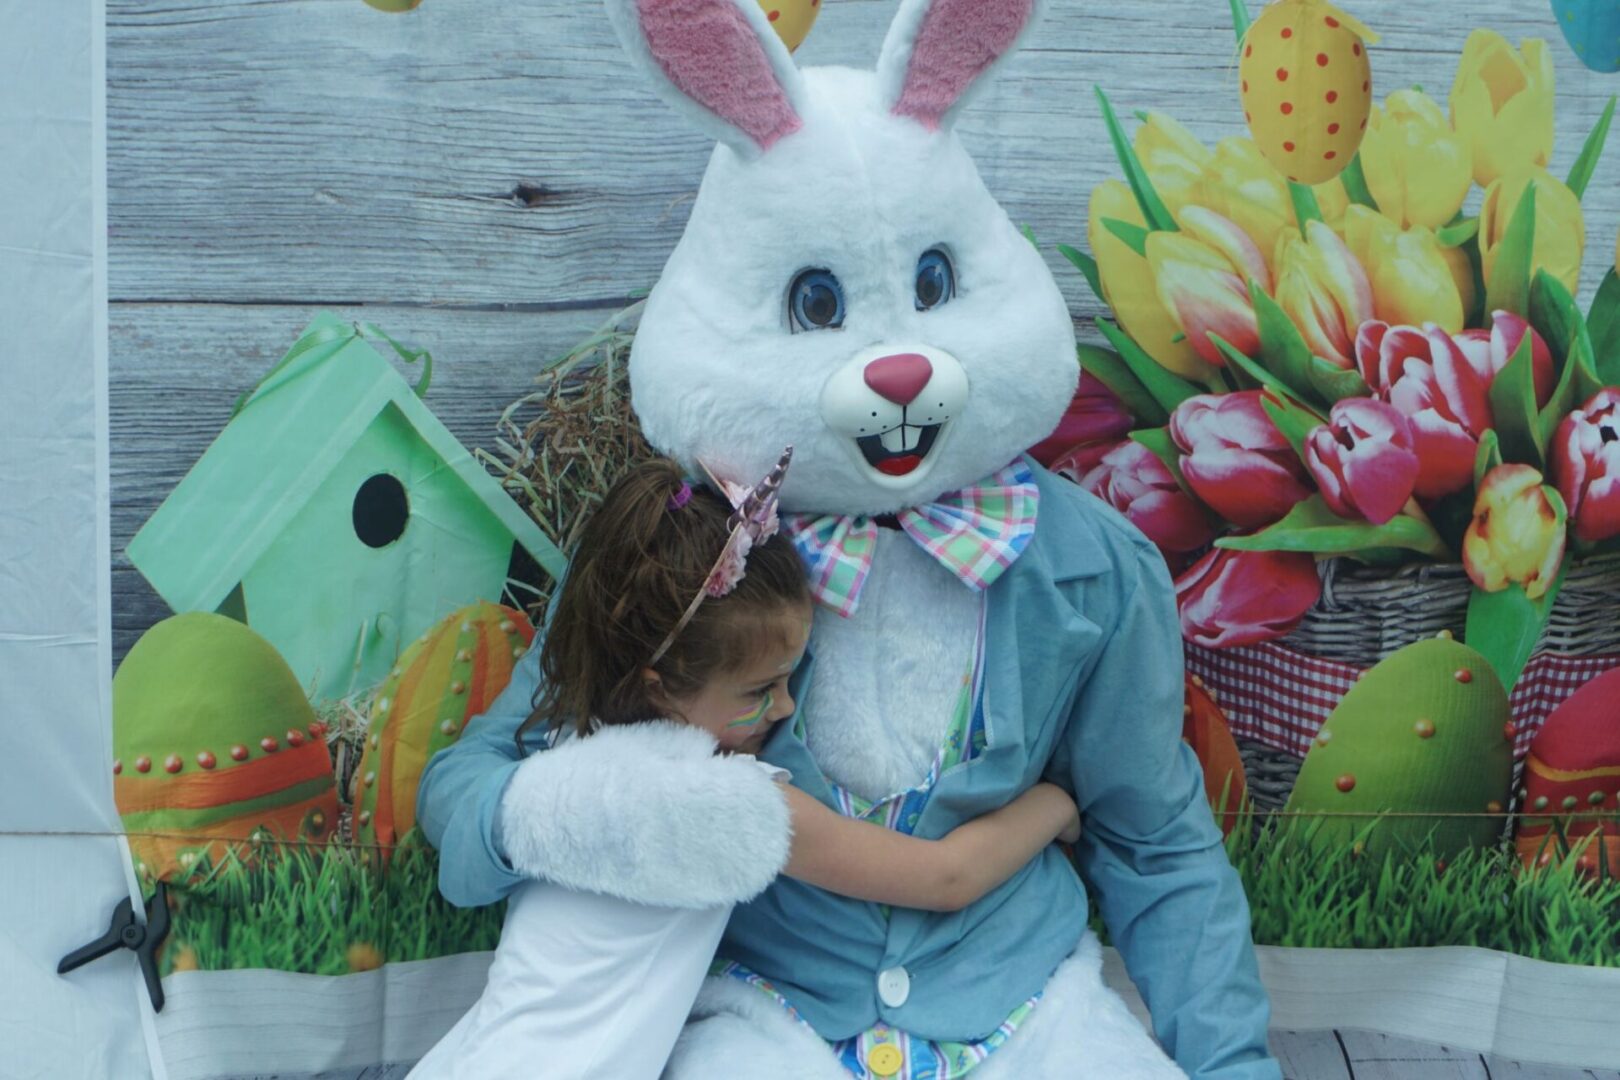 A girl with a face paint and unicorn headband hugging the bunny mascot (2)